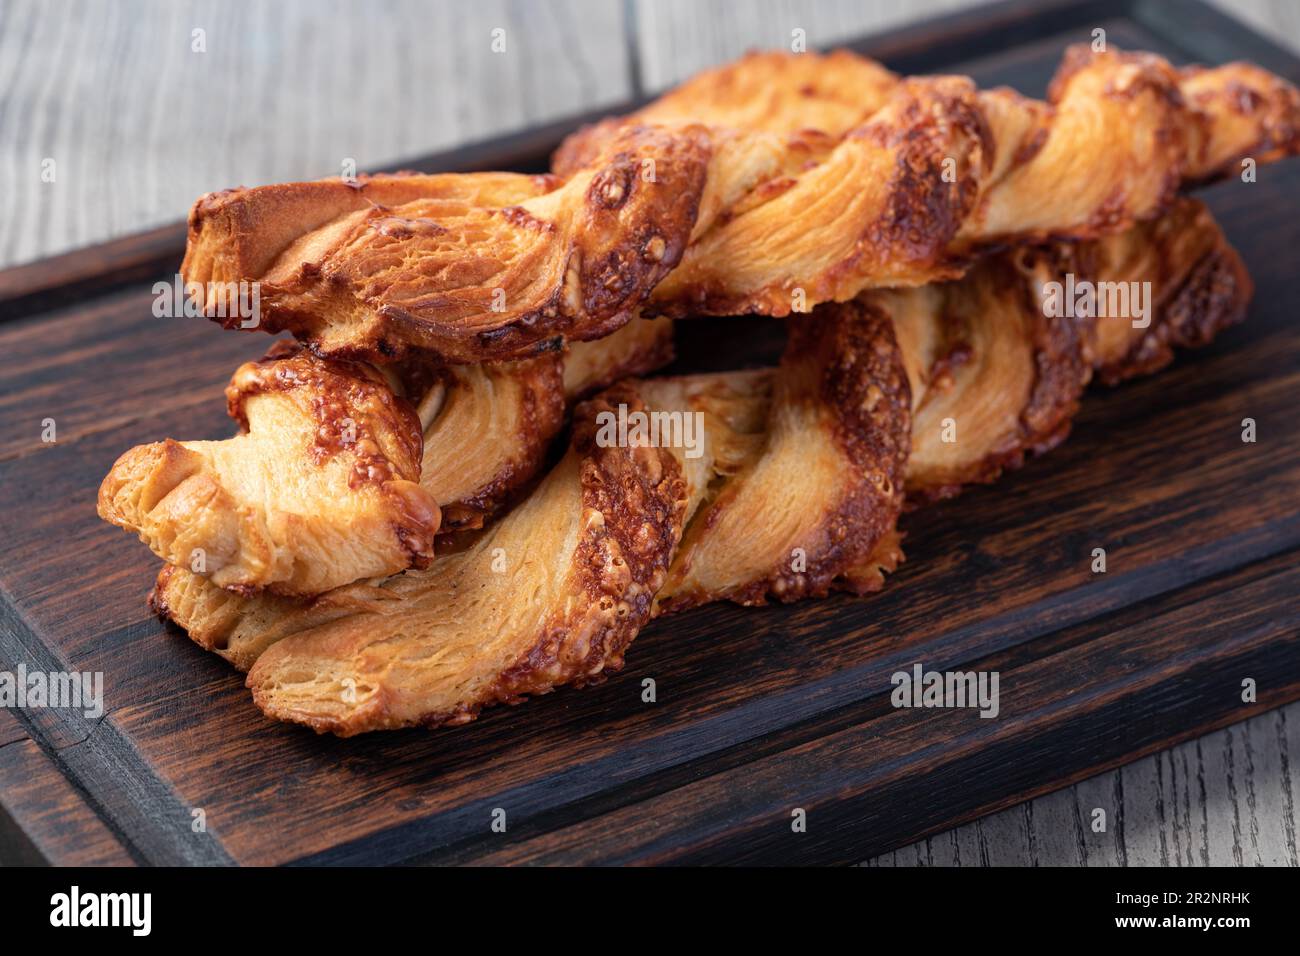 Cheese filled roll on a wooden Stock Photo